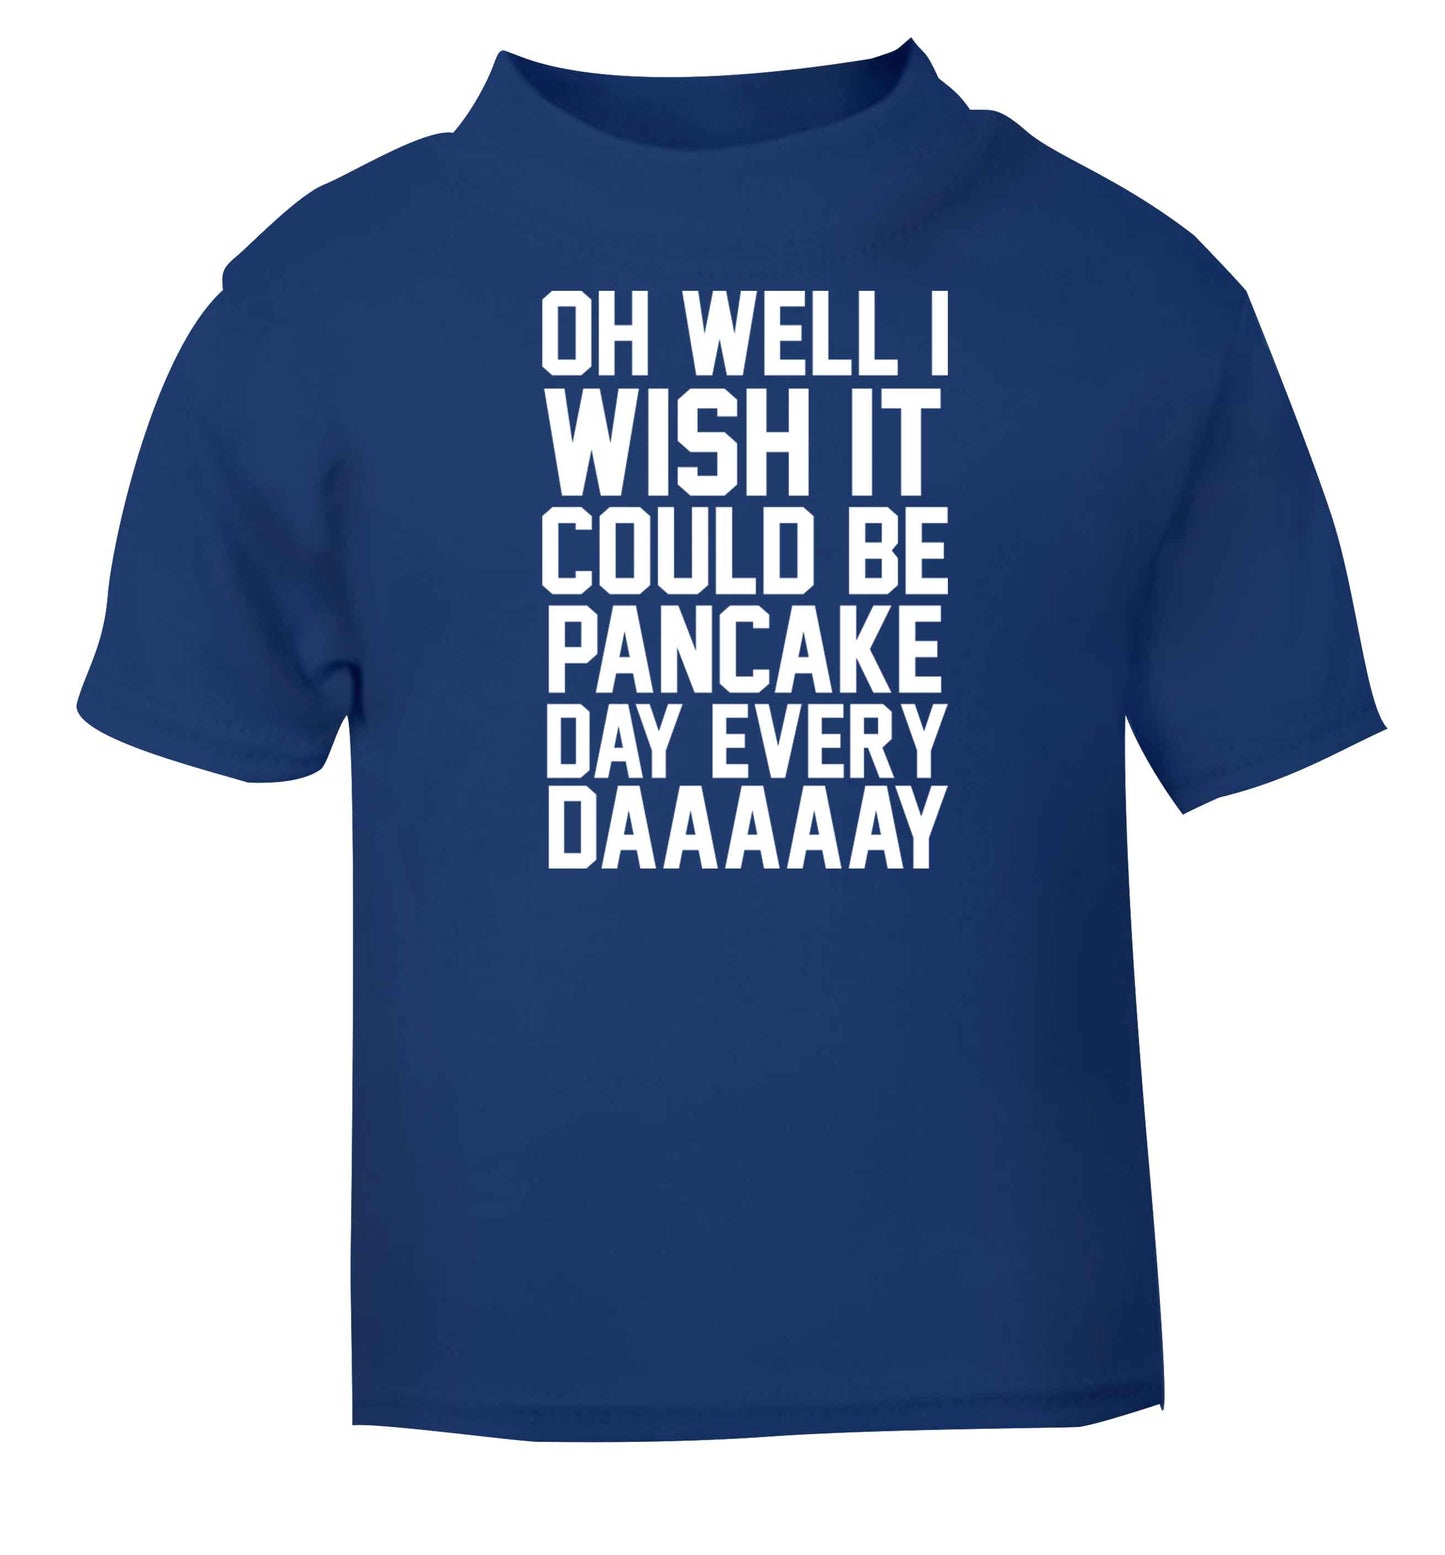 Oh well I wish it could be pancake day every day blue baby toddler Tshirt 2 Years